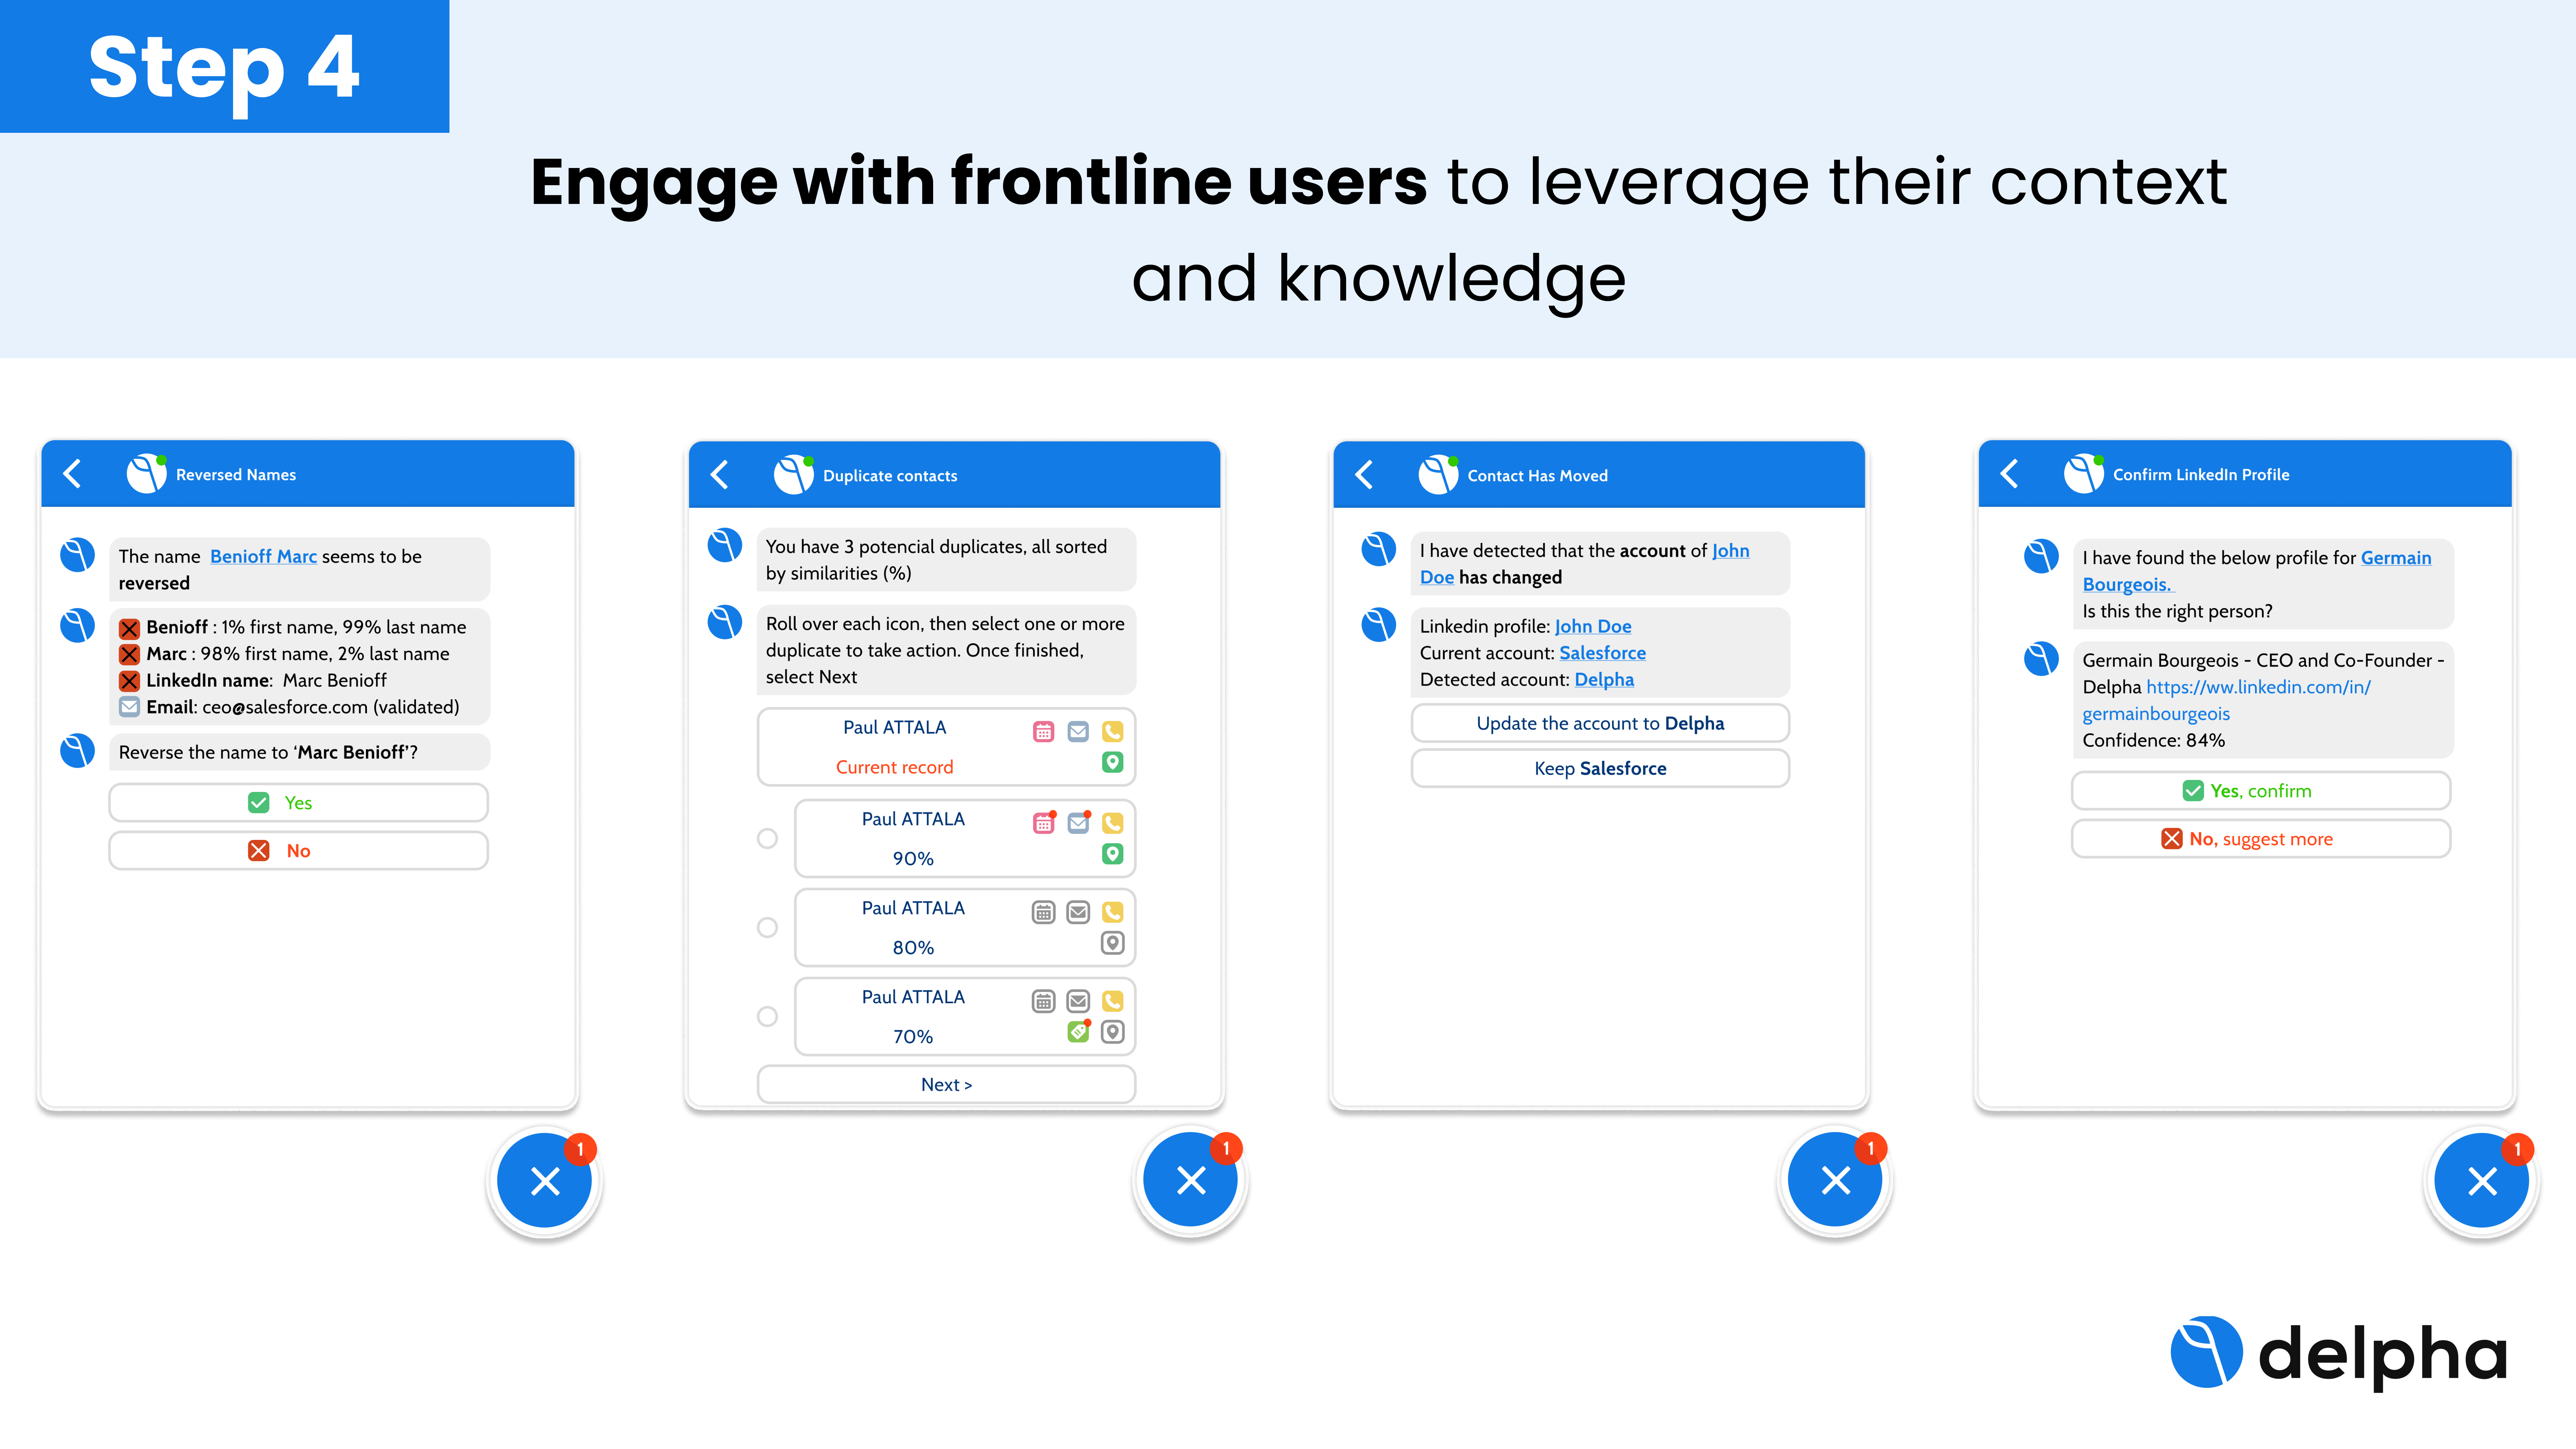 Step 4 to improve data quality is to engage with end users to leverage their contextual knowledge